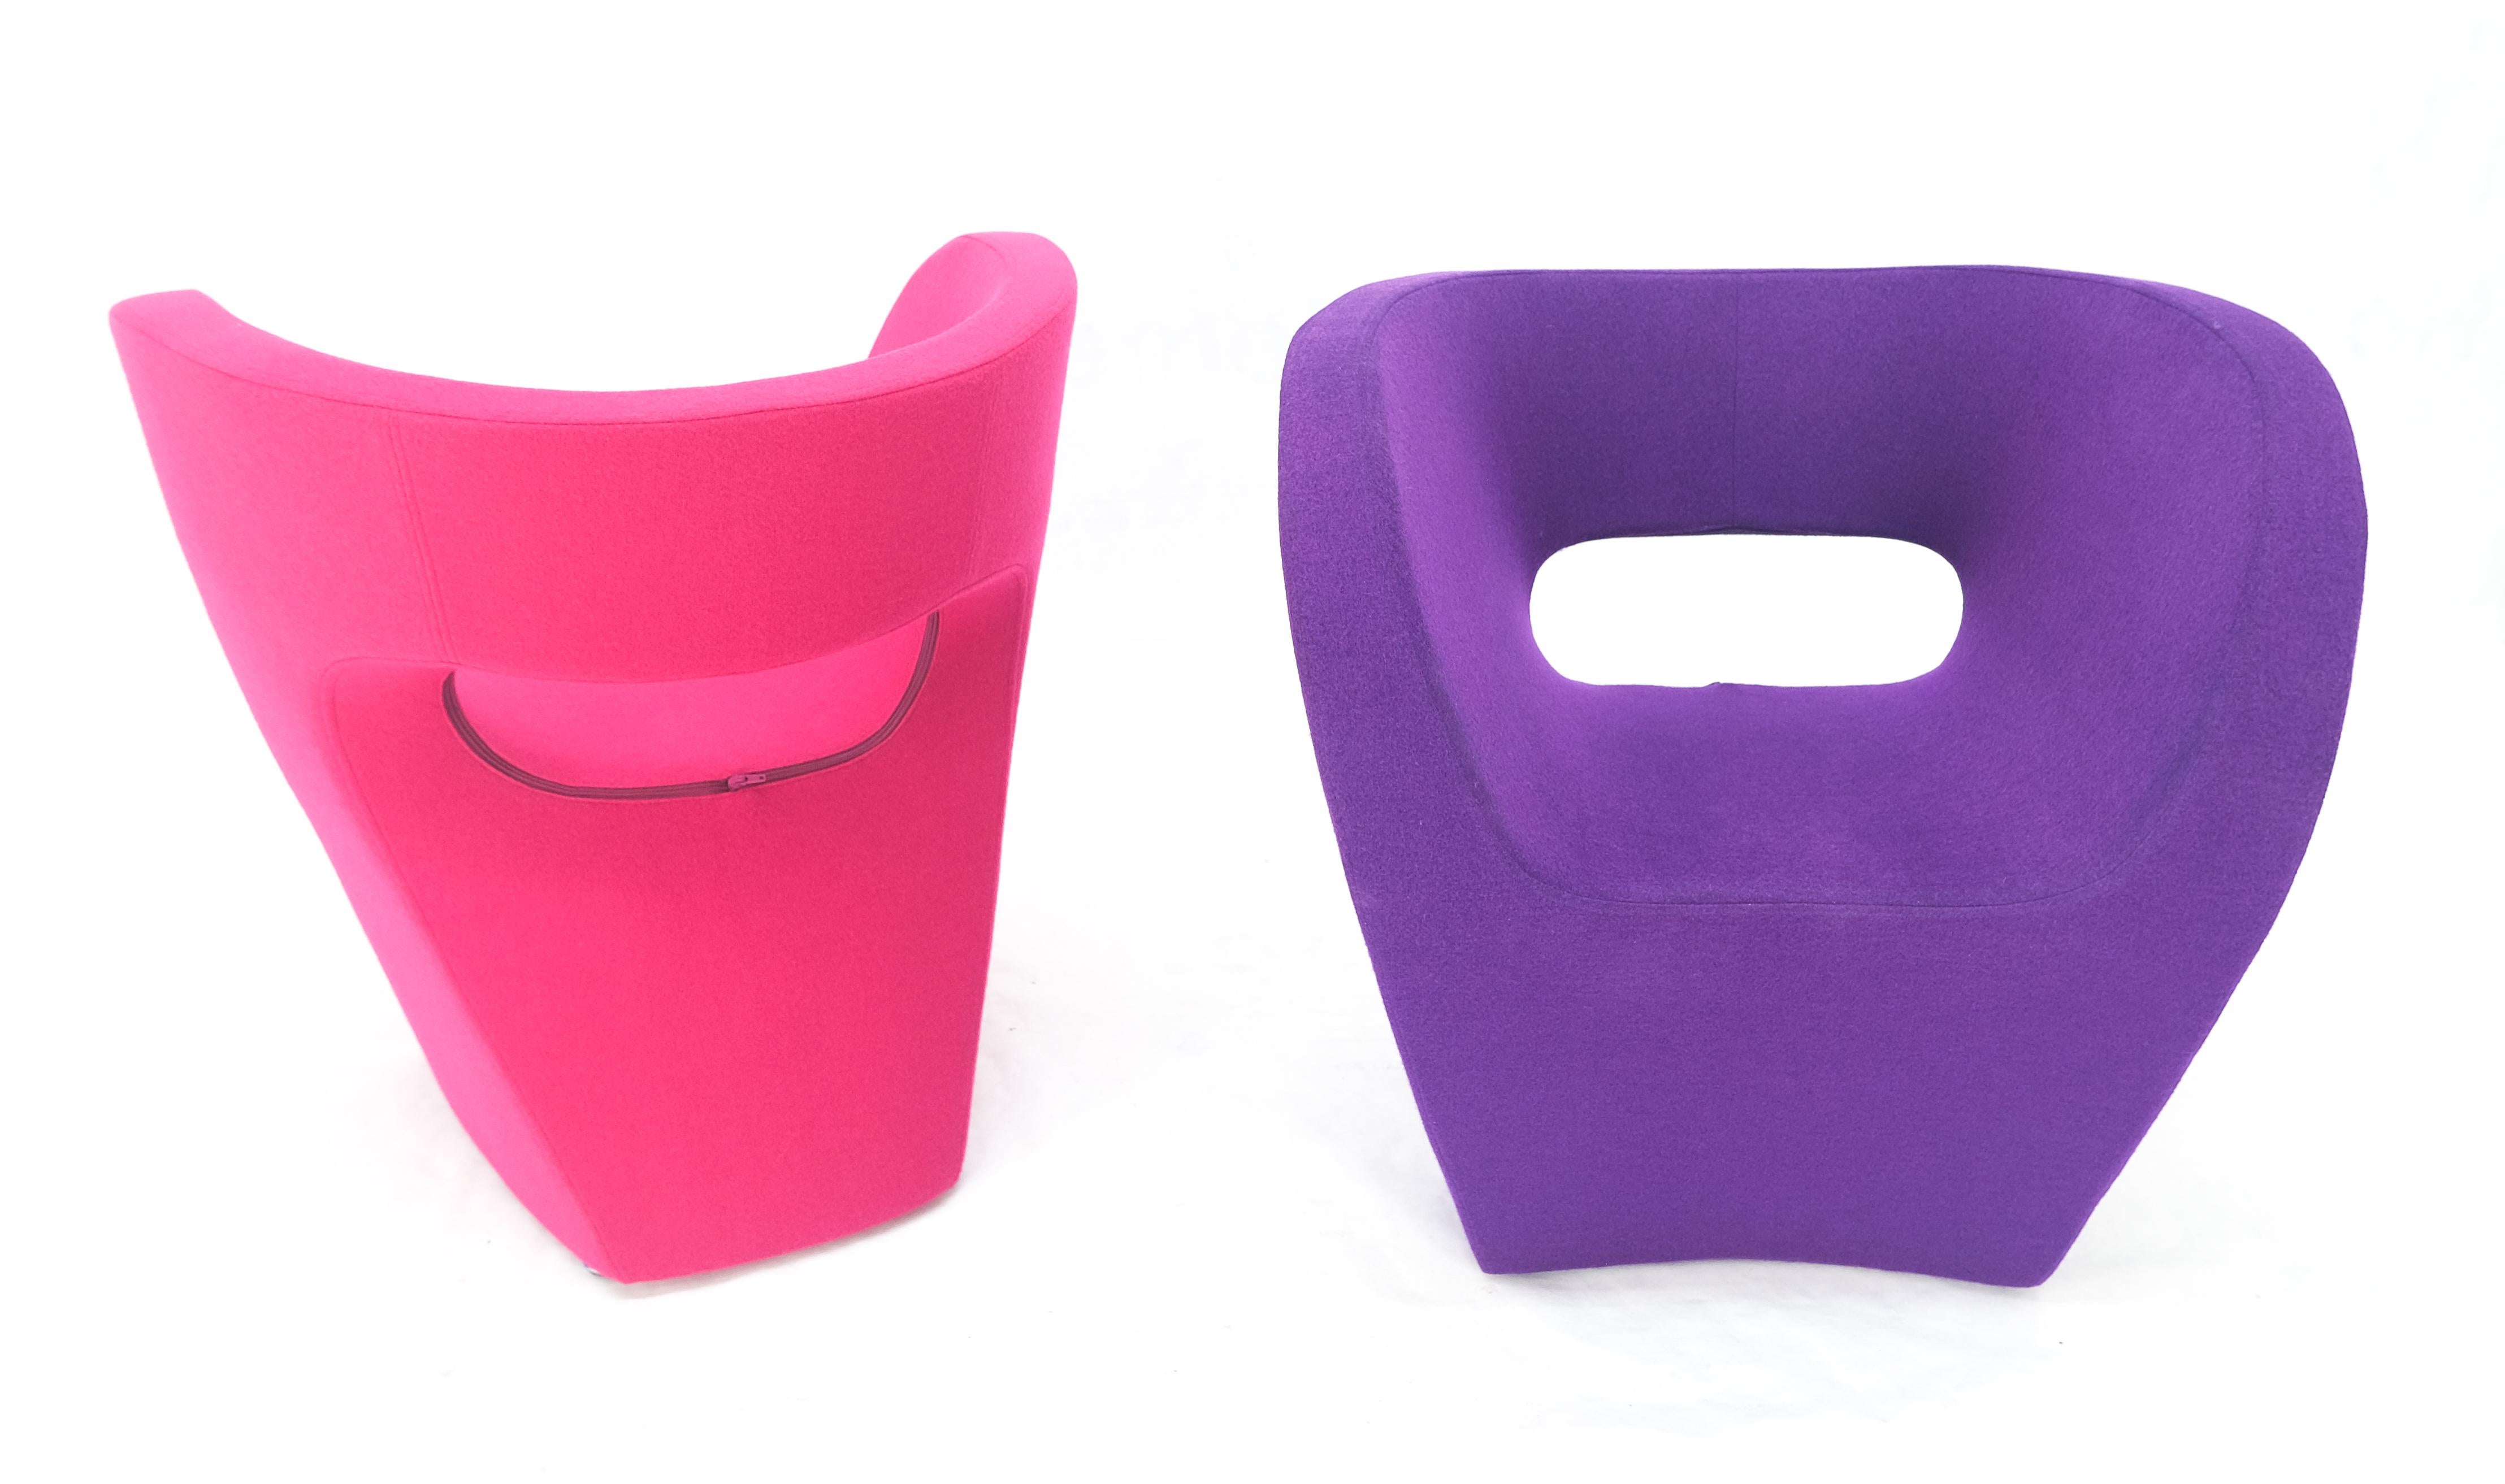 Set 4 Albert Armchair by Ron Arad for Moroso Purple & Red Wool Upholstery MINT! For Sale 11